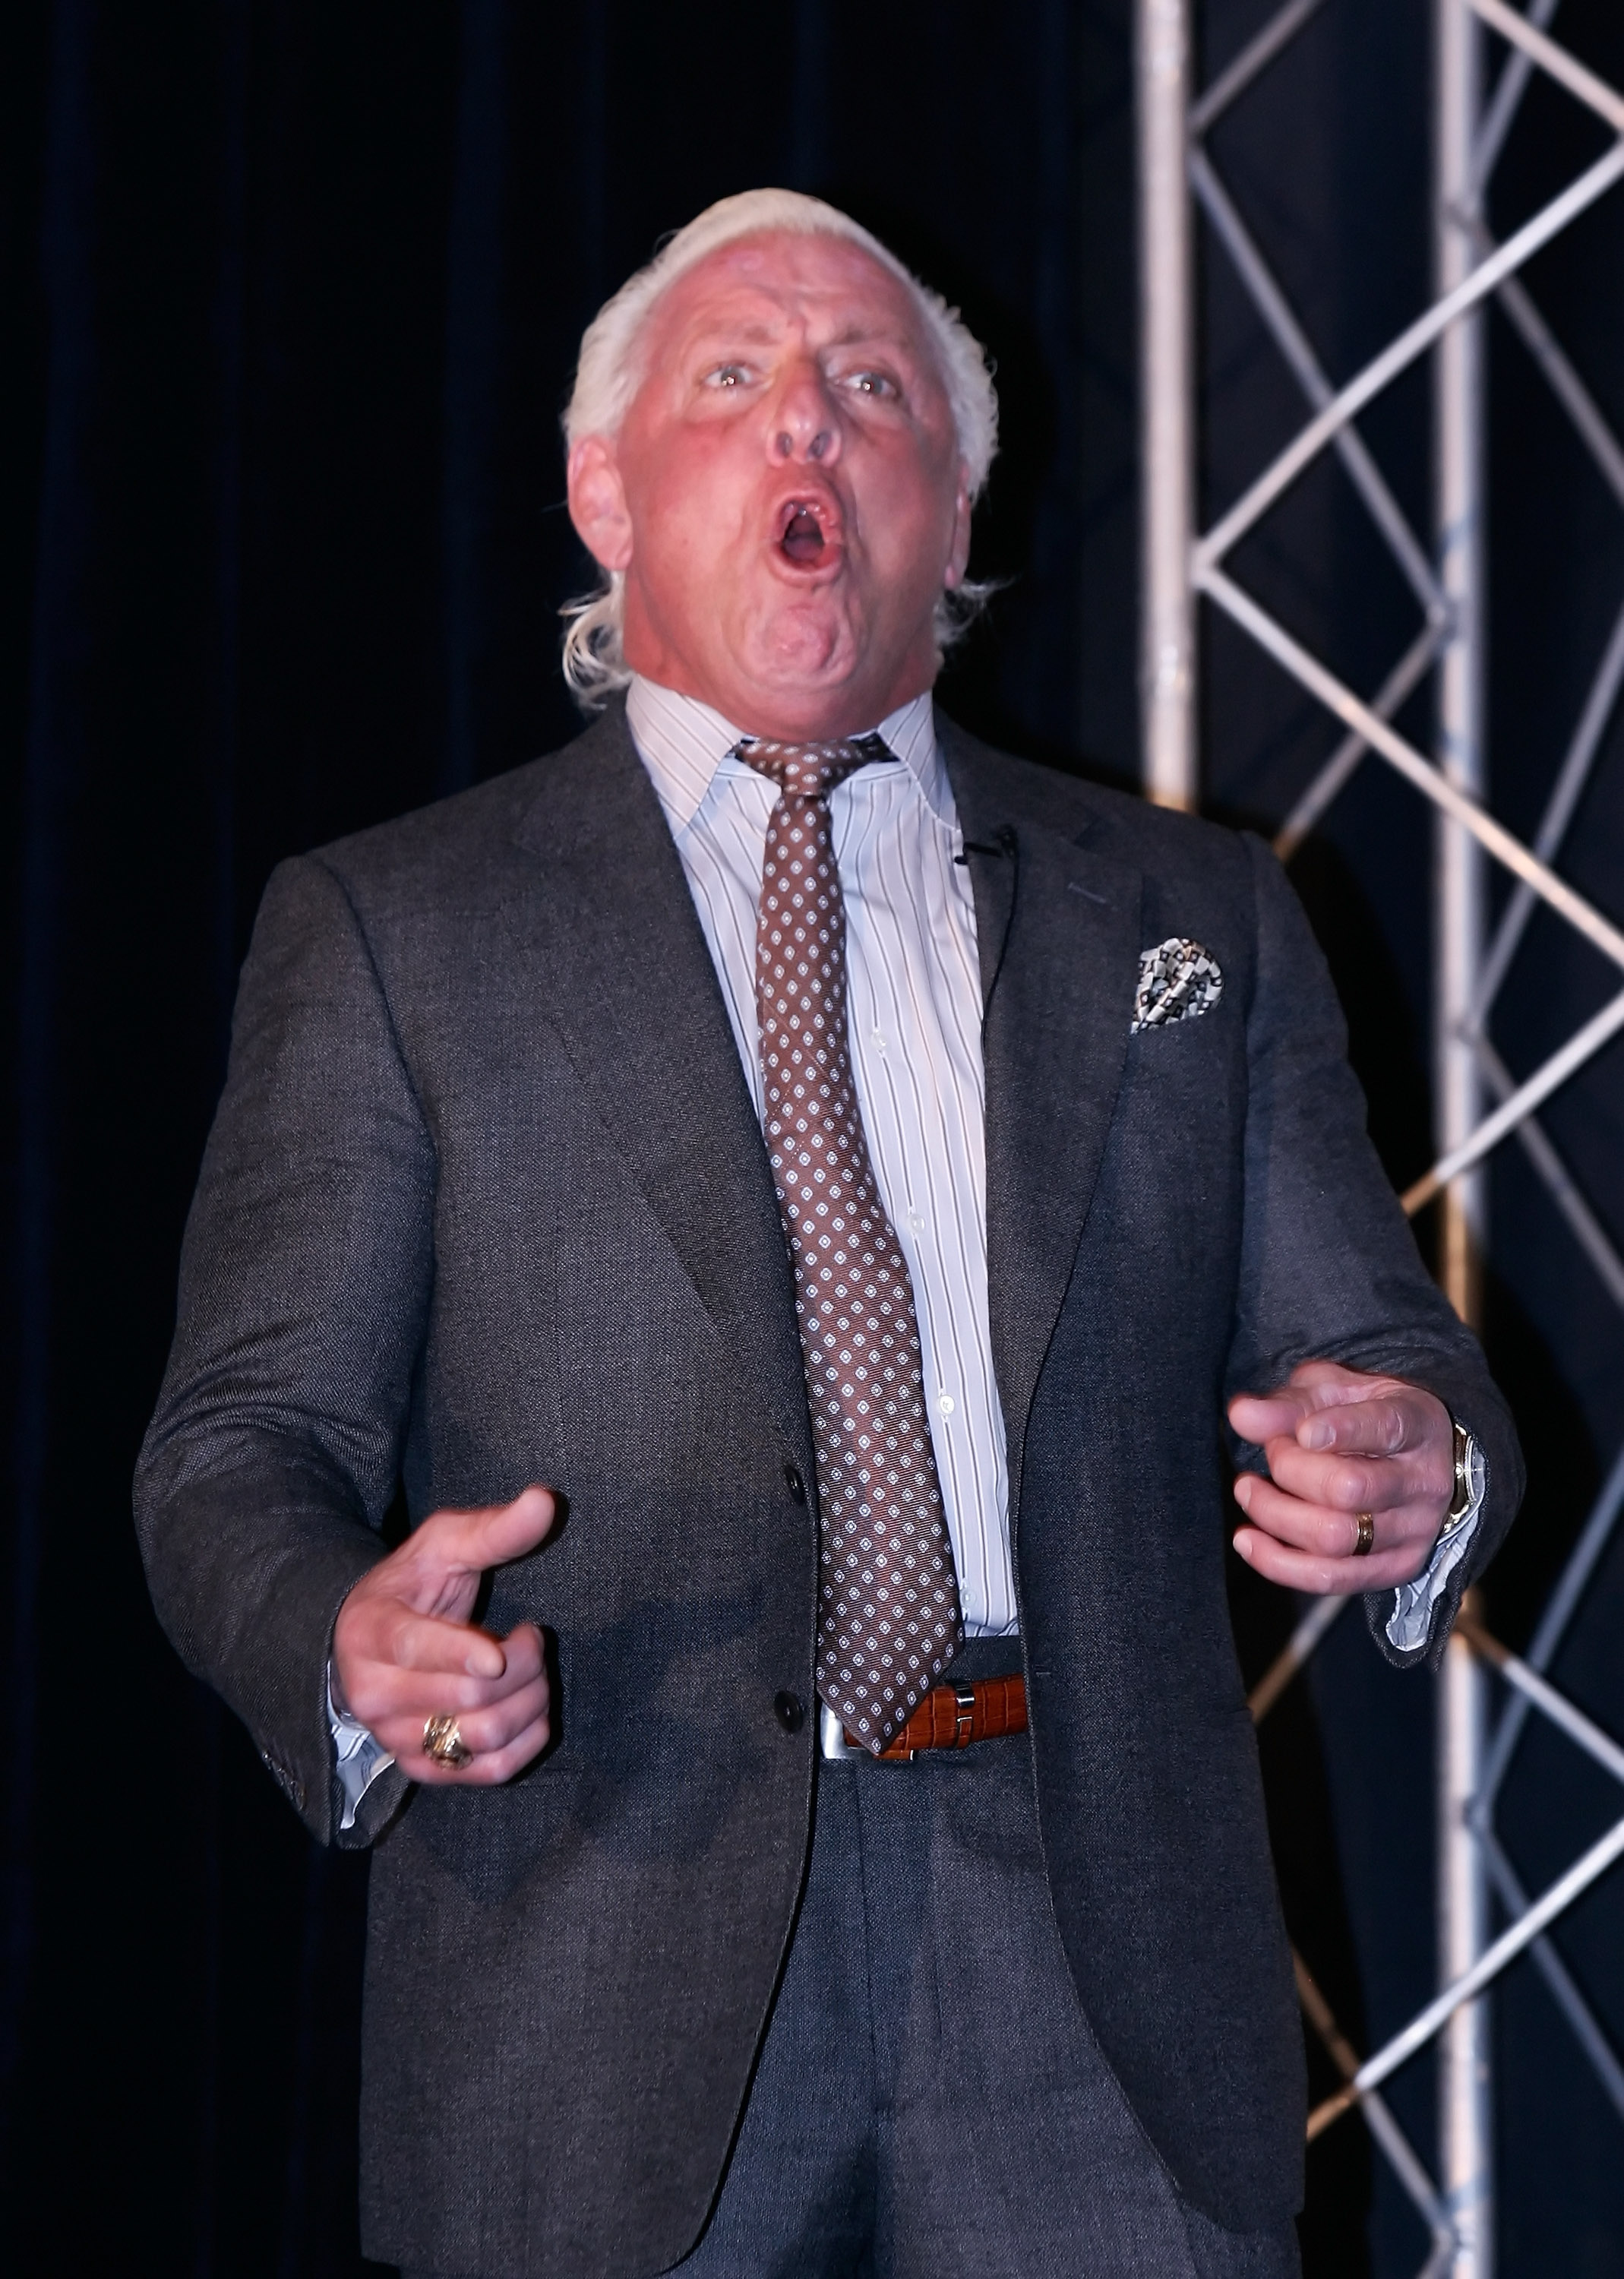 CONCORD, NC - JANUARY 20:  Former American Professional Wrestler Ric Flair performs his famous yell 'Wooooo!', for the media during the NASCAR Sprint Media Tour hosted by Charlotte Motor Speedway, held at the Embassy Suites, on January 20, 2010 in Concord